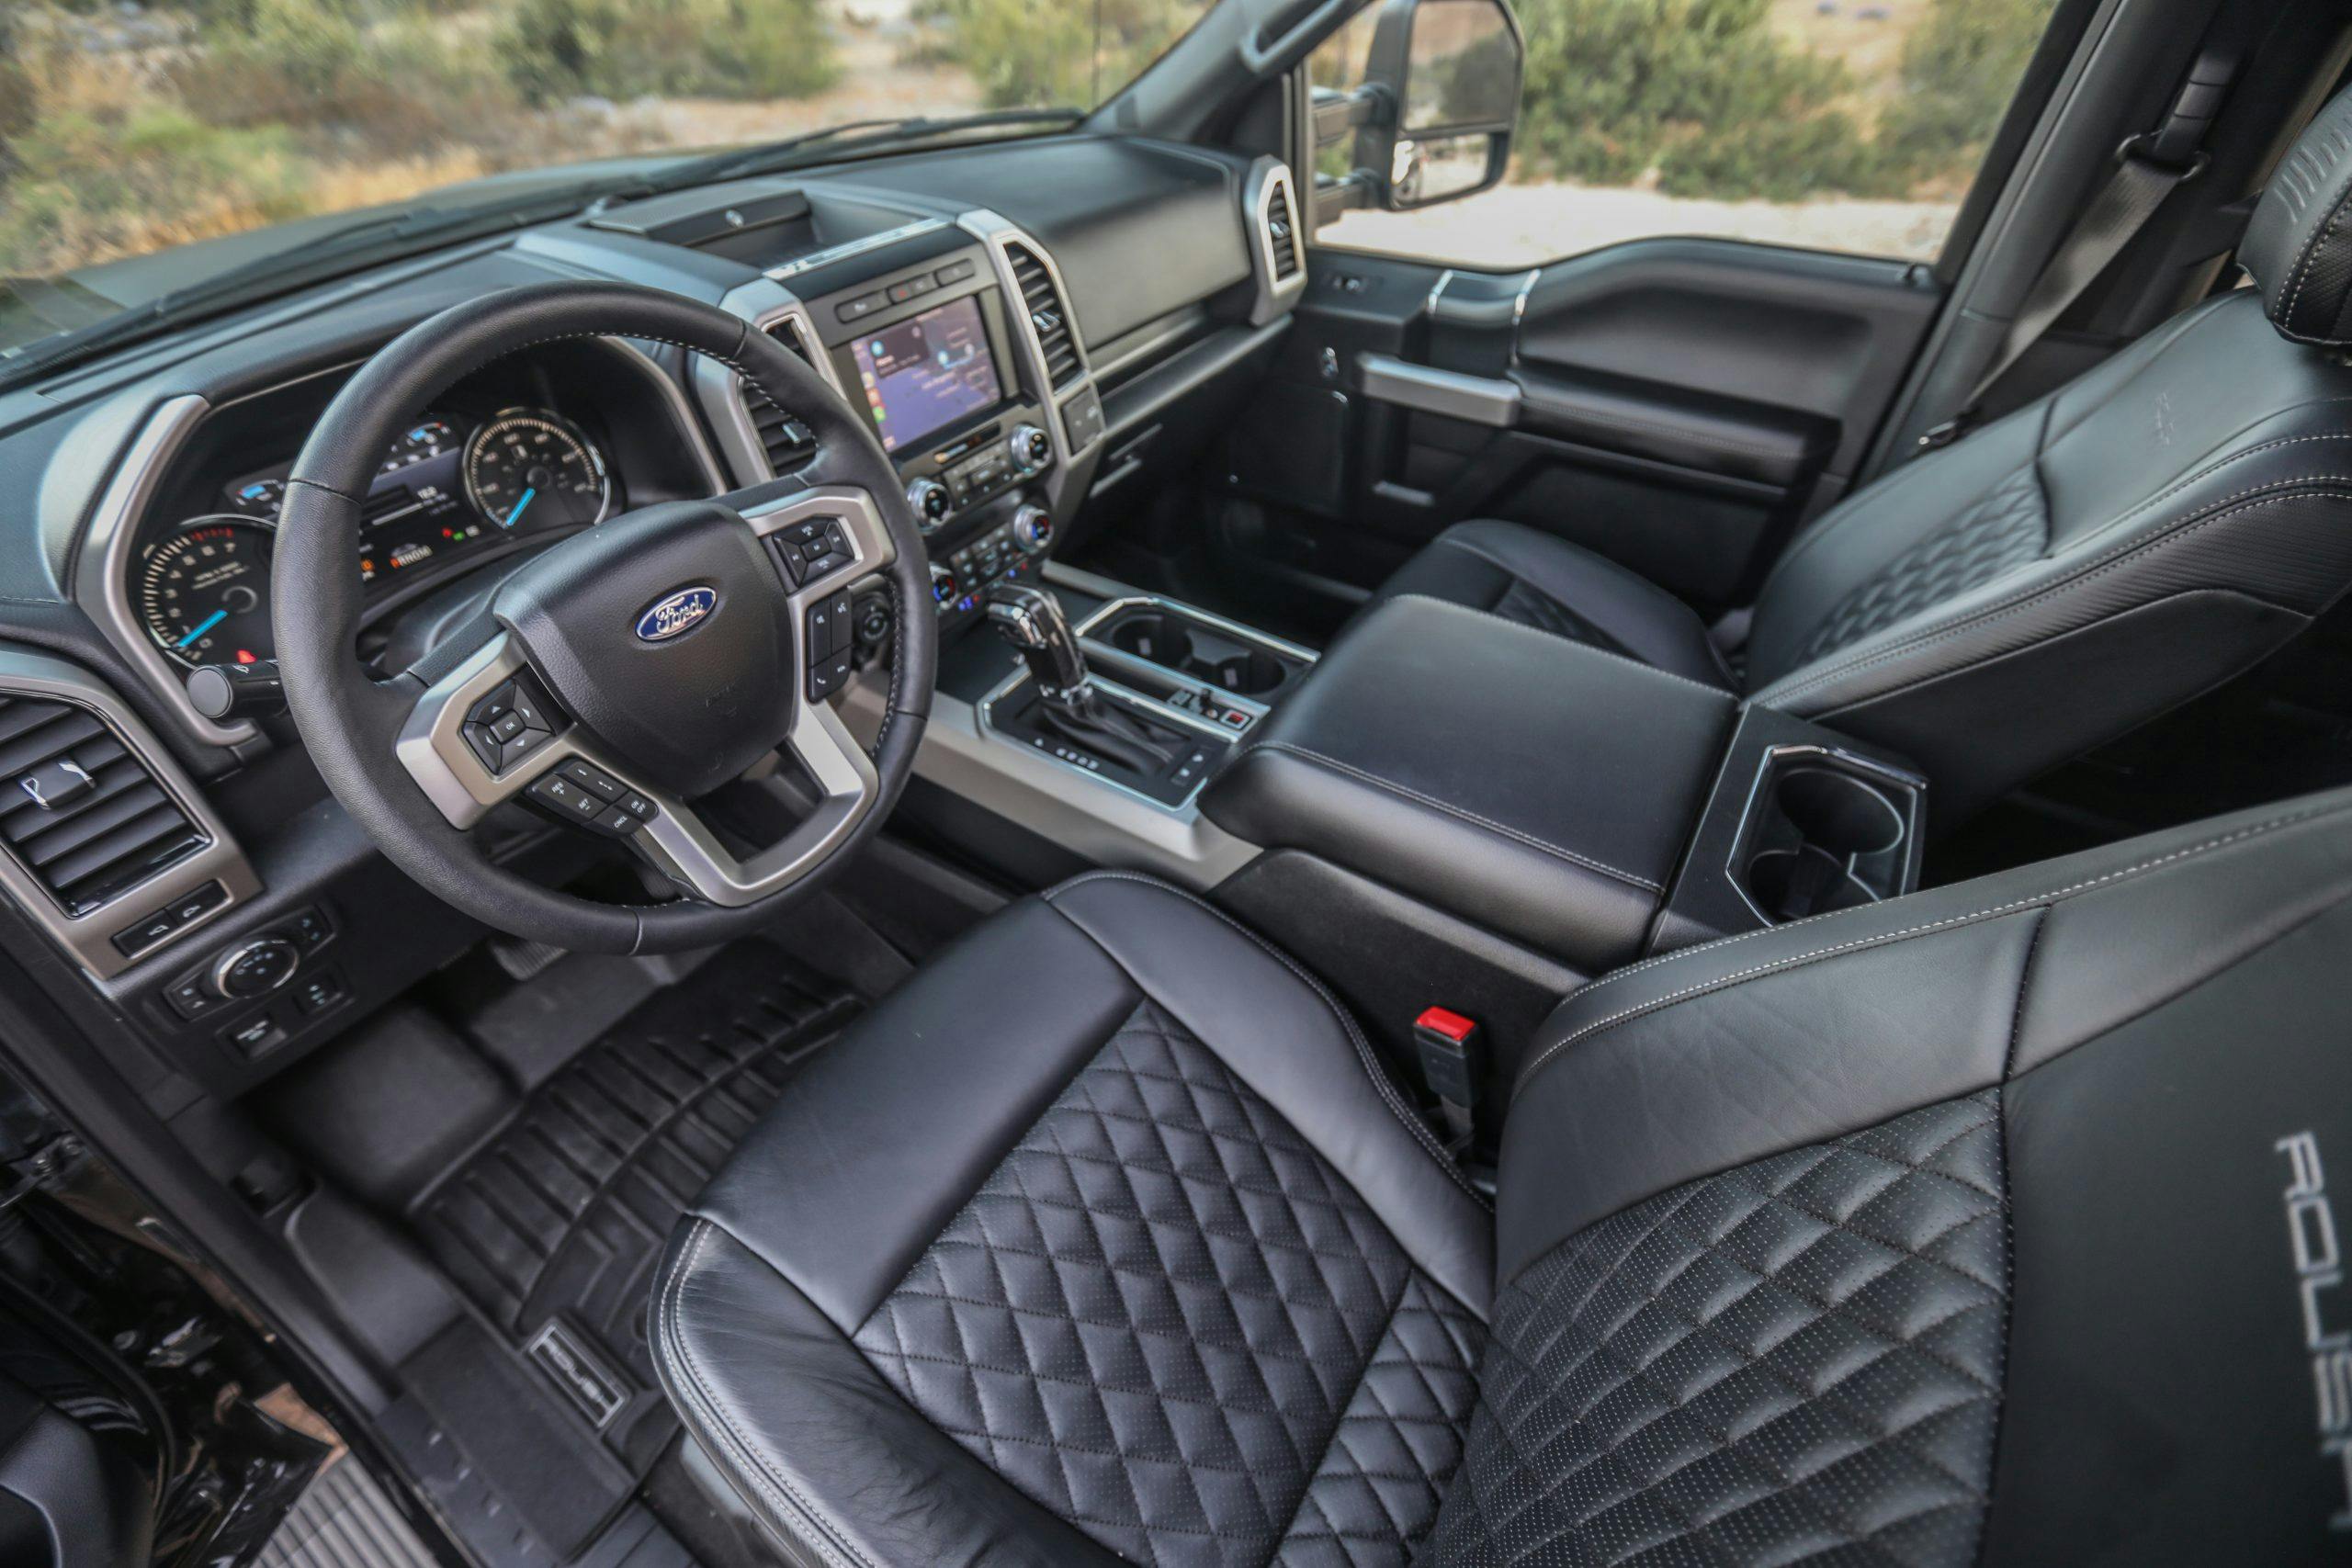 2020 F-150 Roush 5.11 Tactical Edition front seat